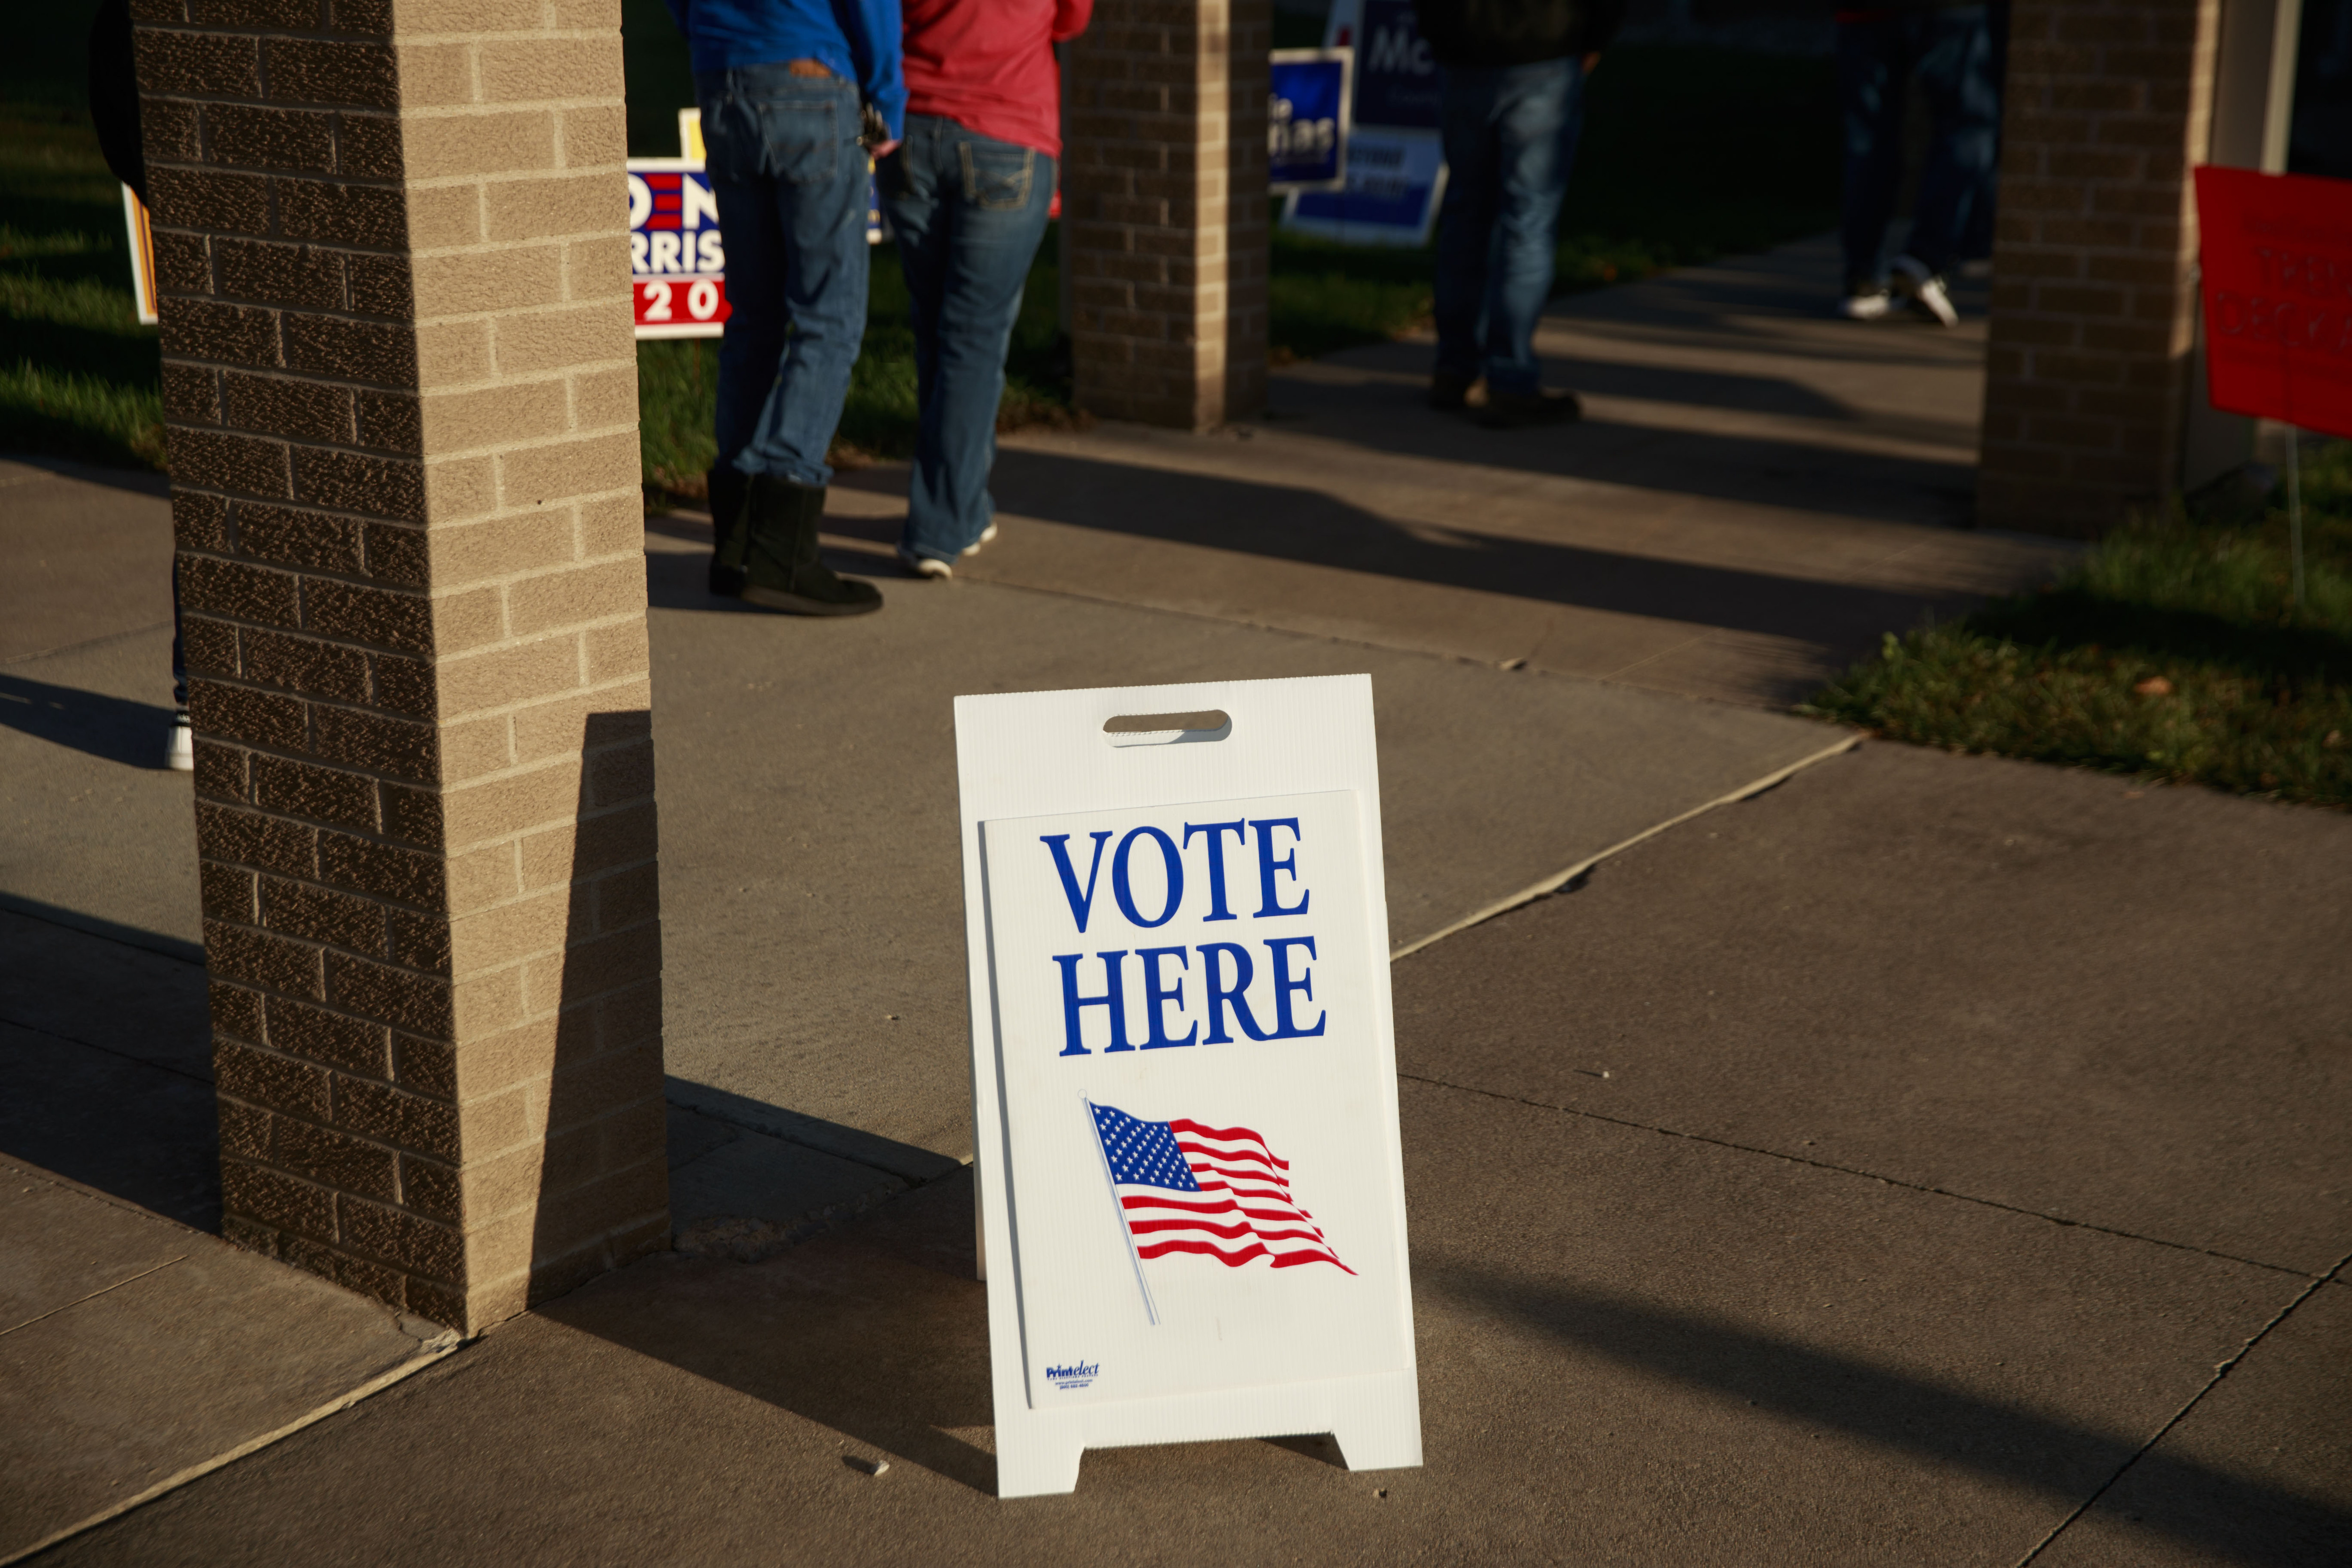 ELLETTSVILLE, INDIANA, UNITED STATES - 2020/11/03: A "Vote here" sign seen on Election Day 2020 at St. John the Apostle Catholic Church in Ellettsville, Indiana